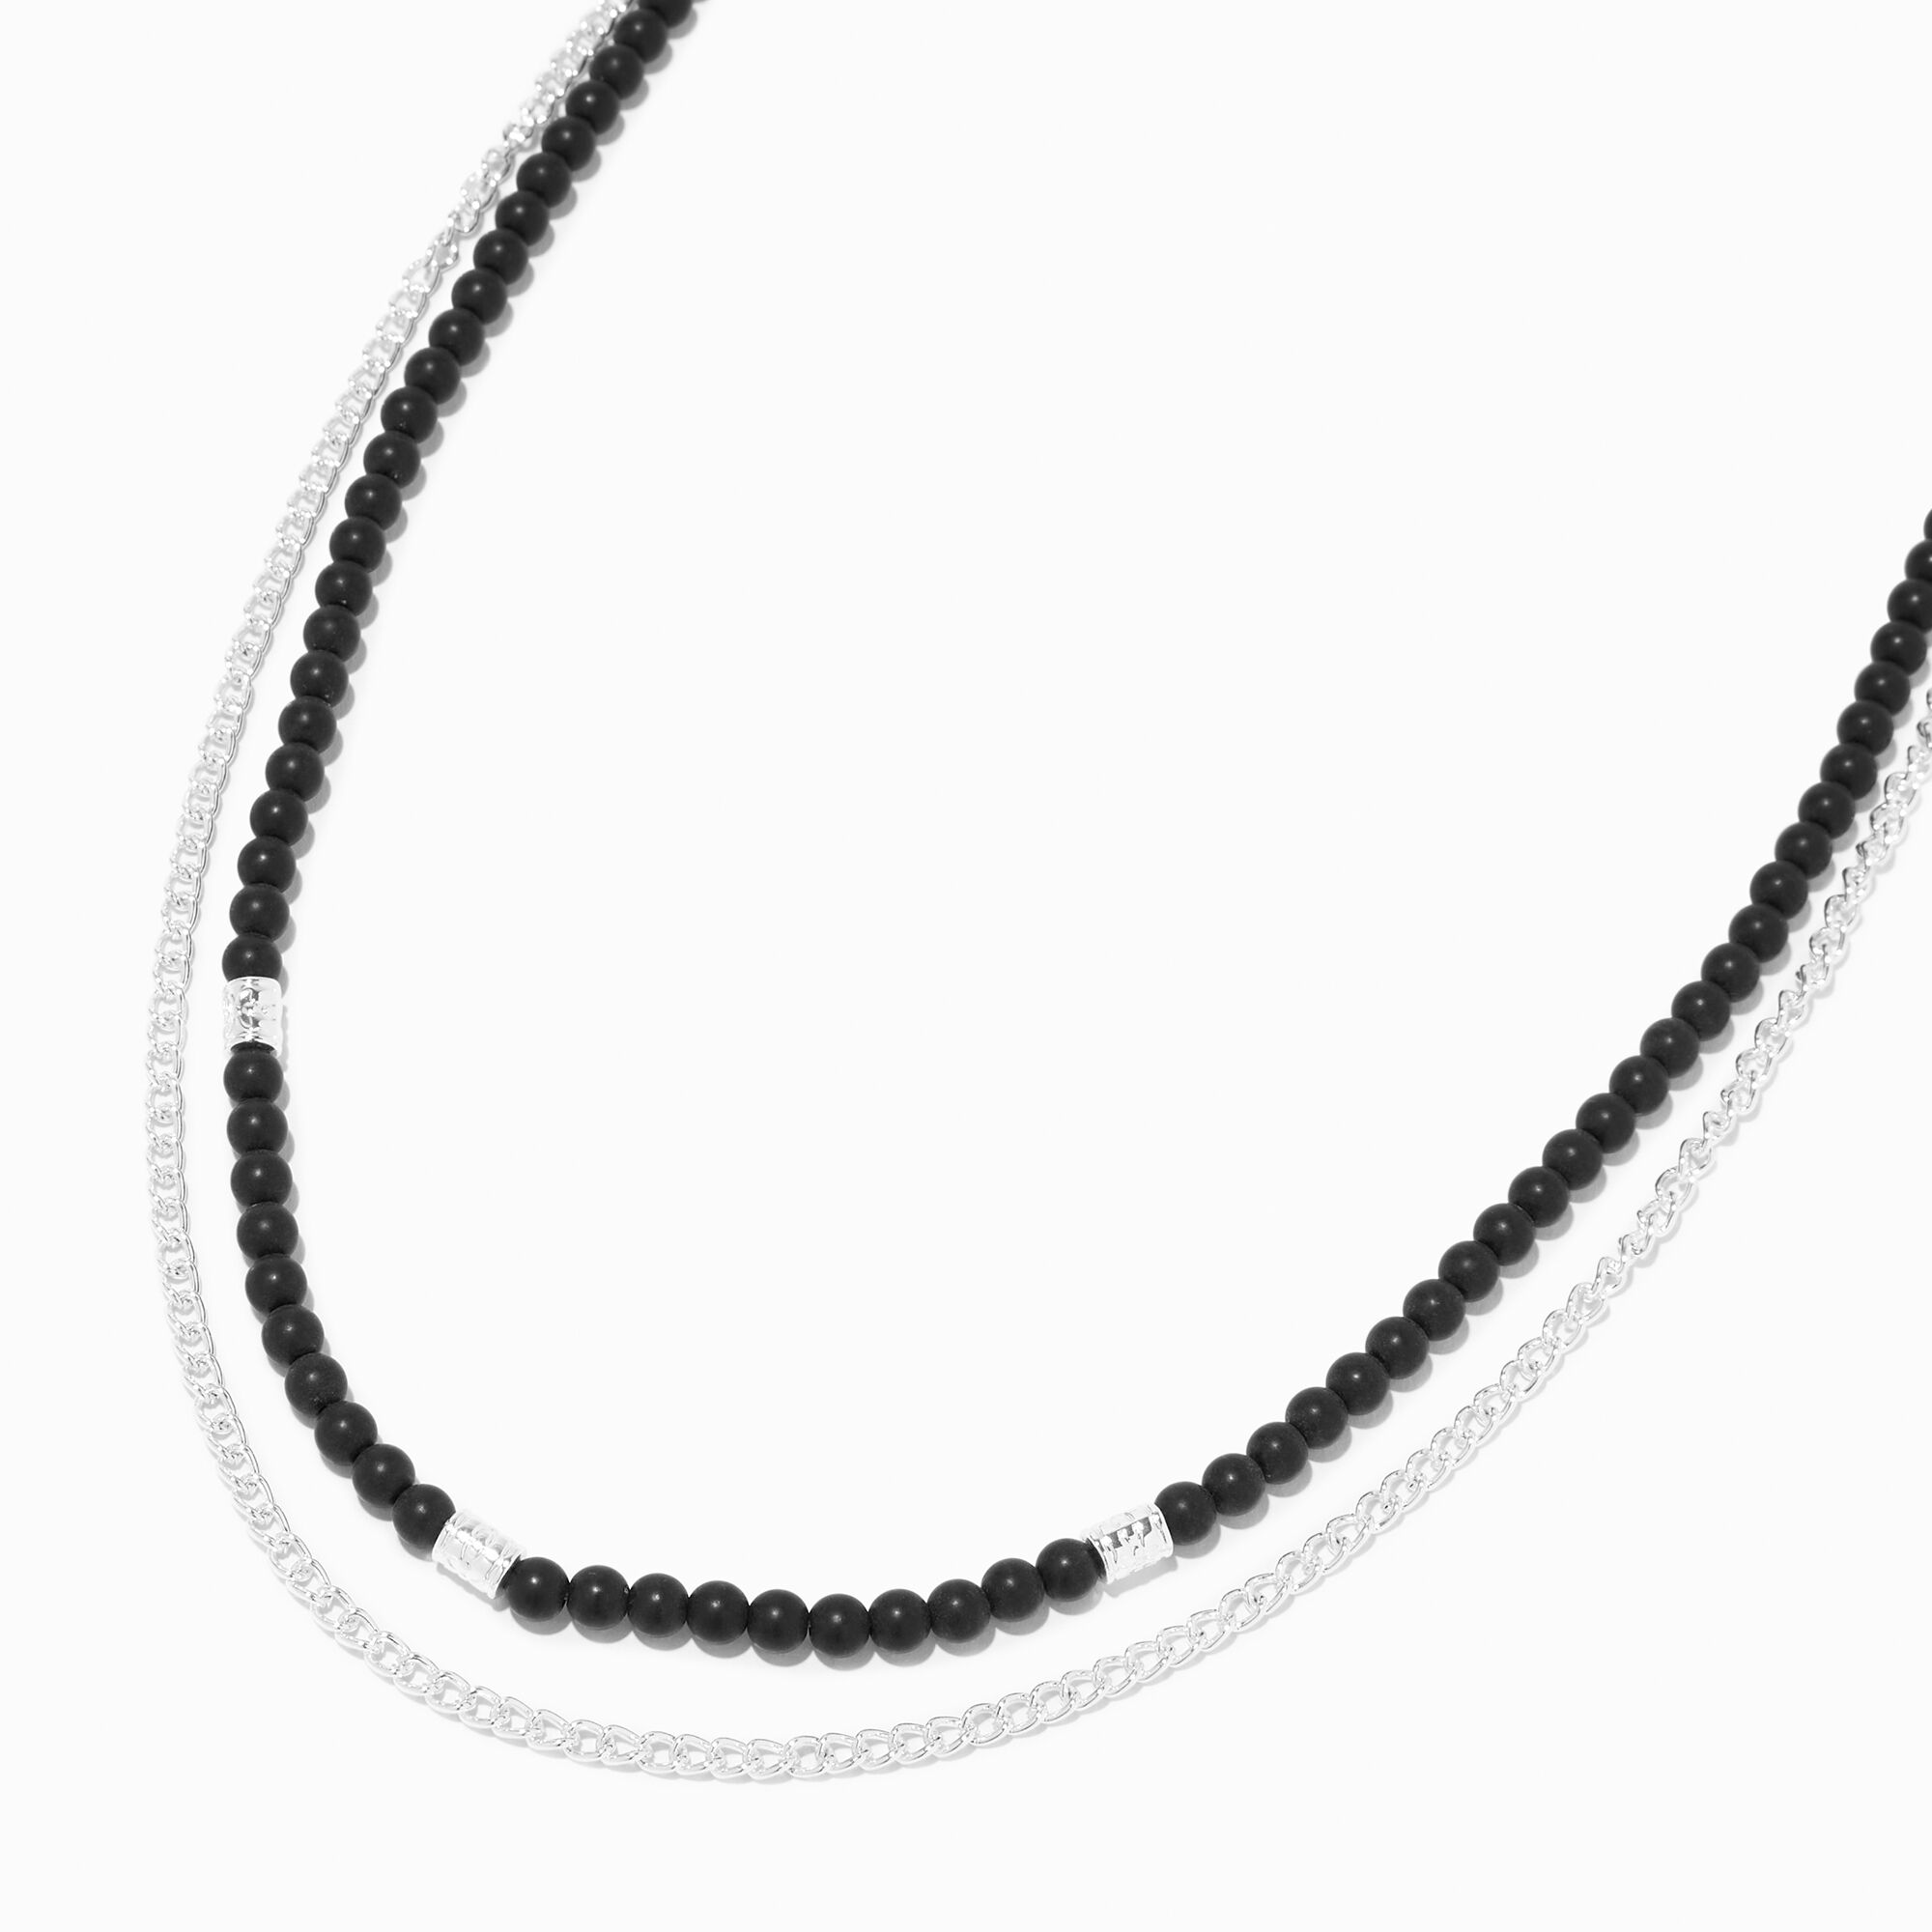 Elegant 925 sterling silver black beads chain necklace, gorgeous small  silver bead design pendant, Mangalsutra chain beaded necklace set325 |  TRIBAL ORNAMENTS